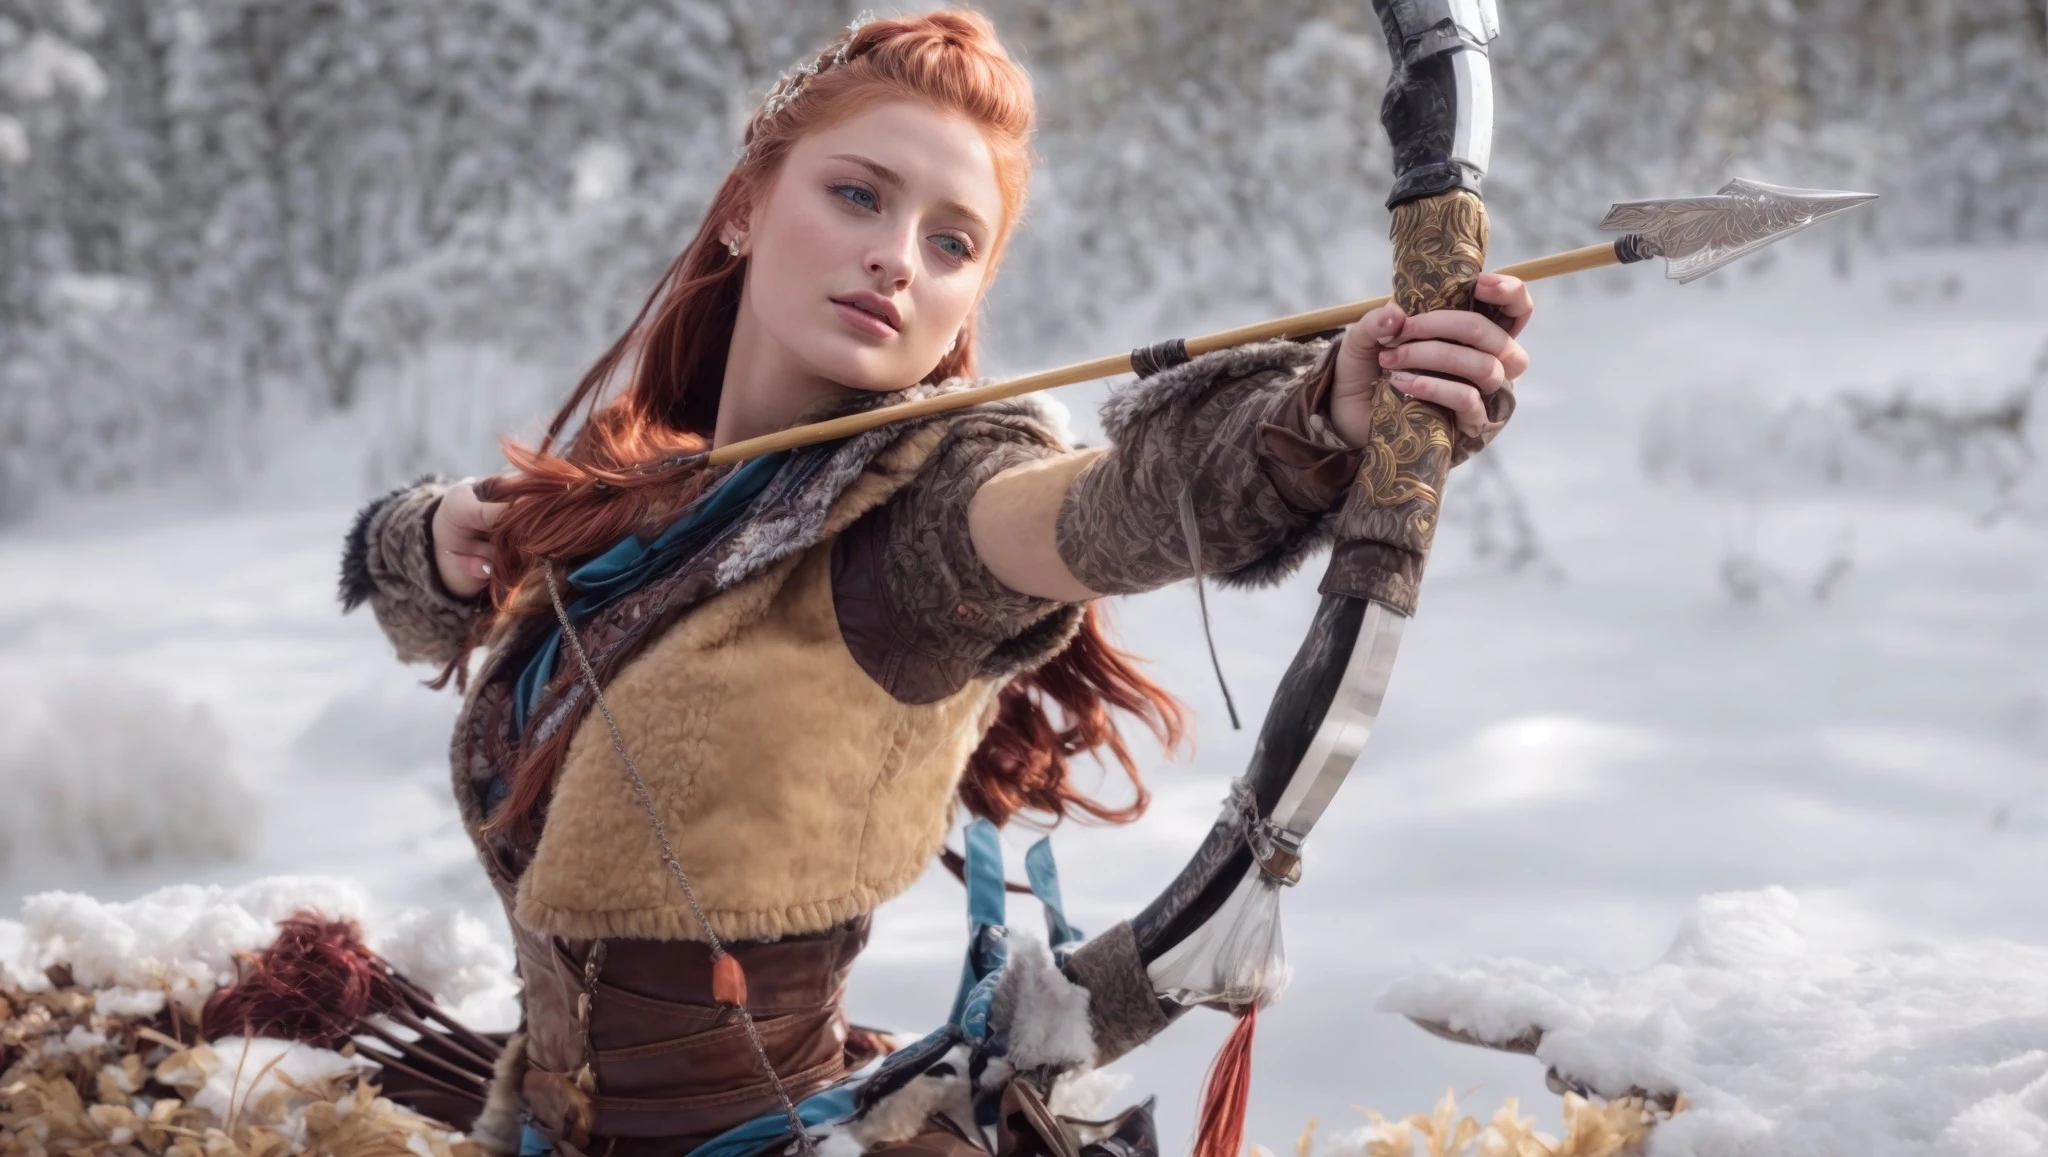 Thanks To Her Father Rost, Aloy Is A Proficient Combatant, Who’s Skilled With Both Her Bow And Spear